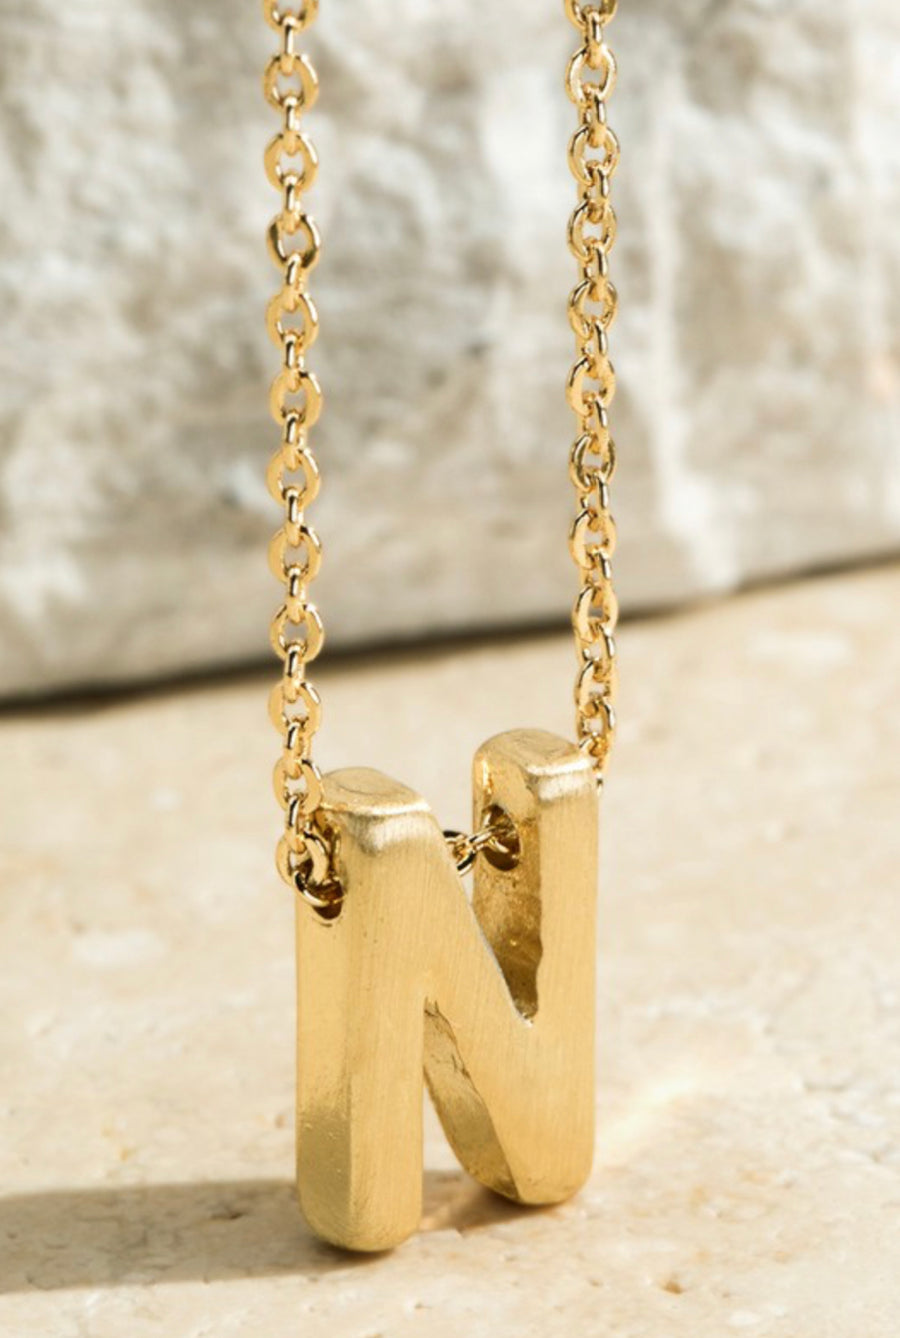 Gold Initial Necklaces